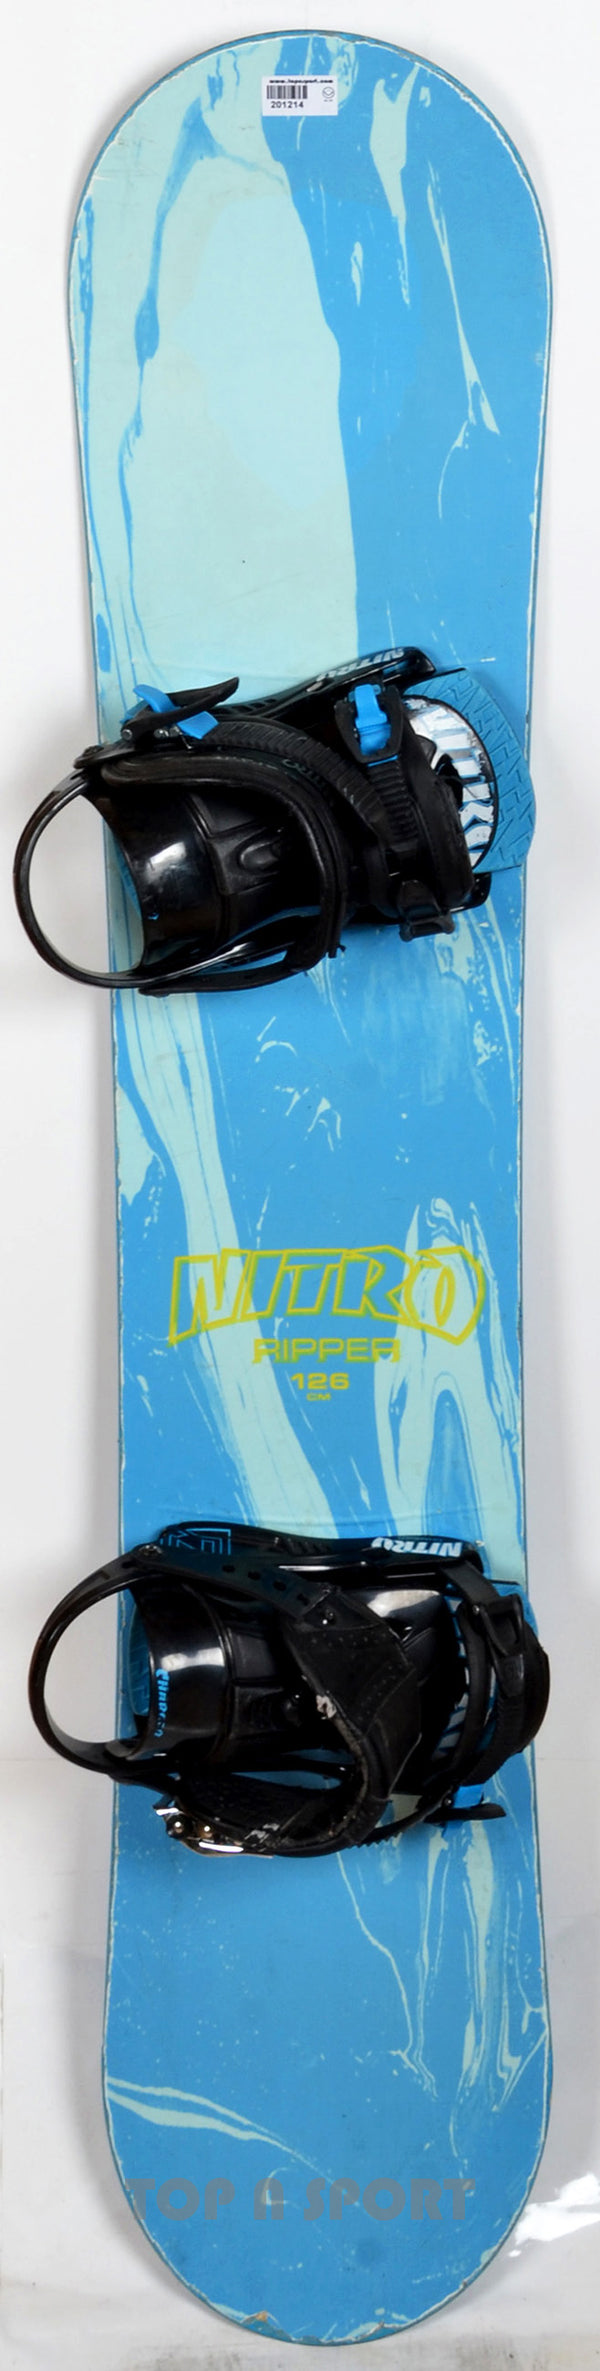 Pack Nitro RIPPER JR + fixations - snowboard d'occasion